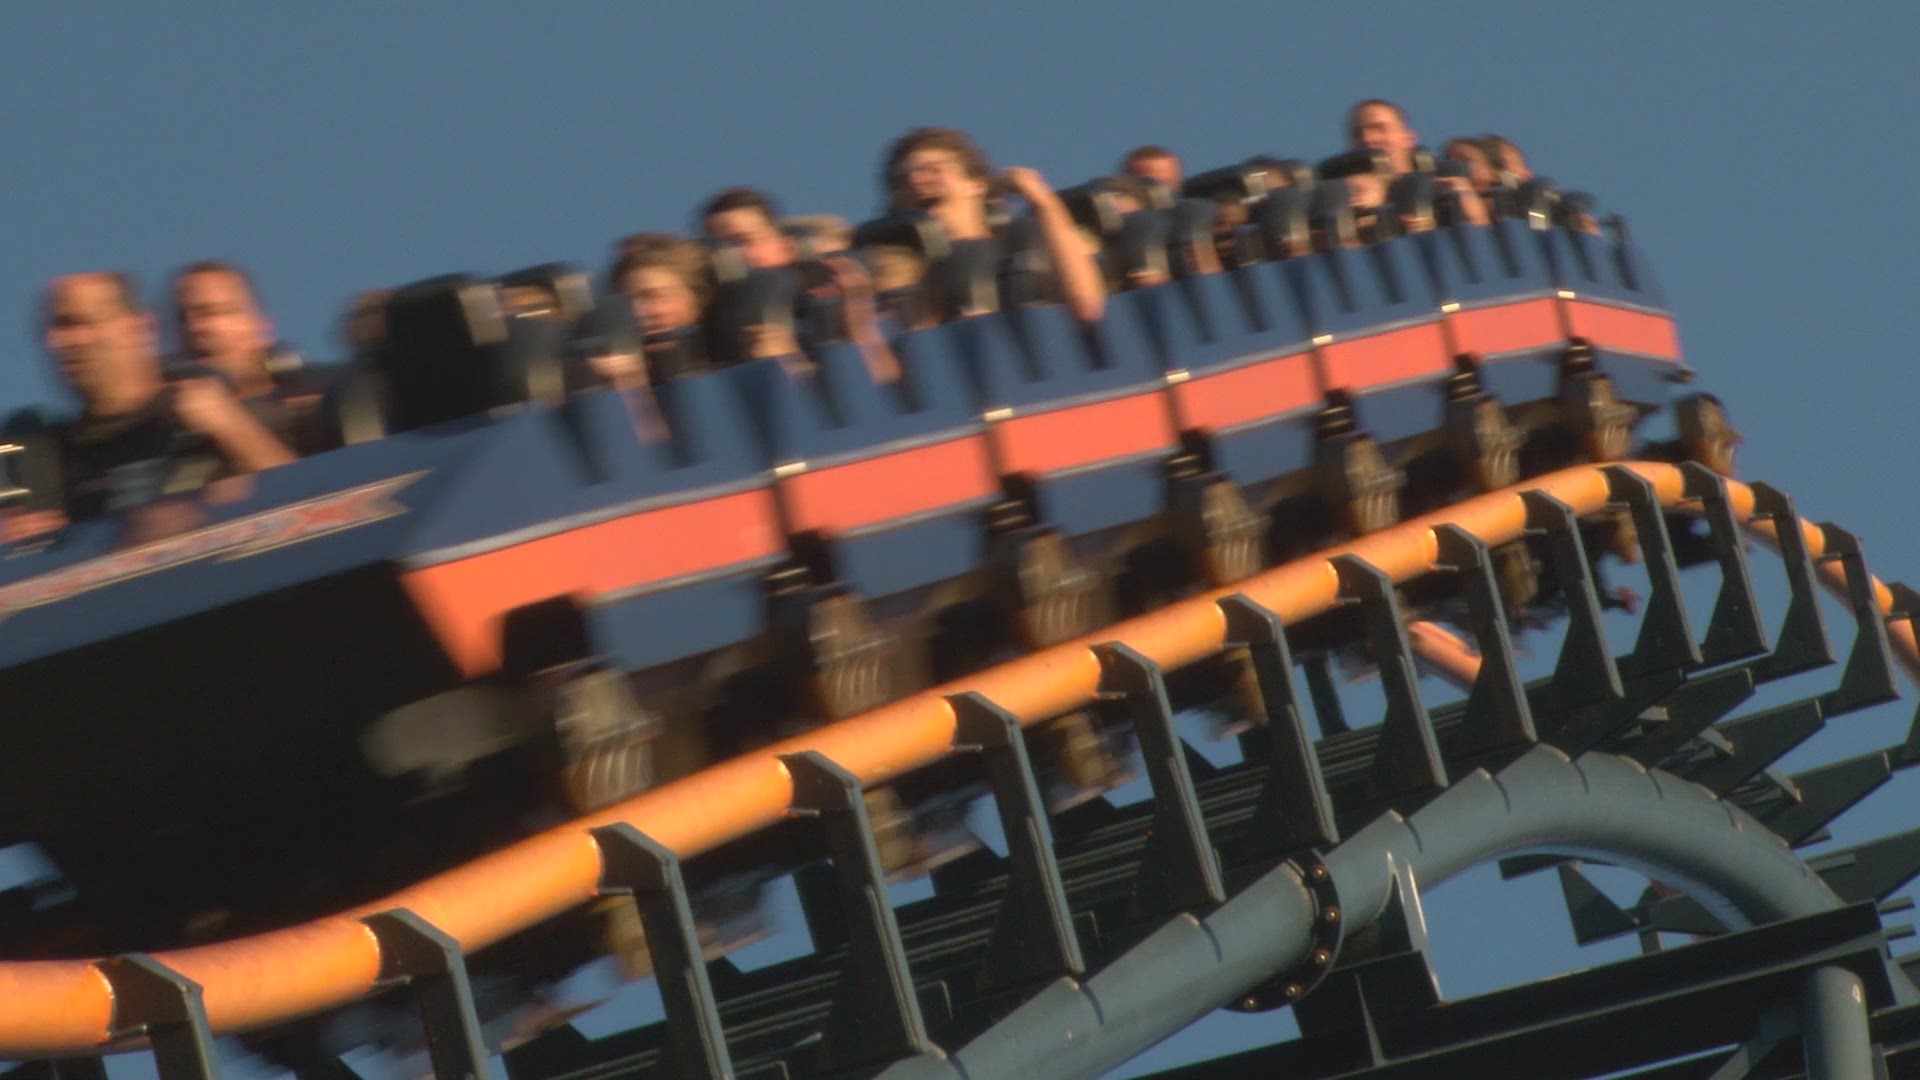 Video of the Vortex roller coaster at Kings Island. The coaster will close on October 27.